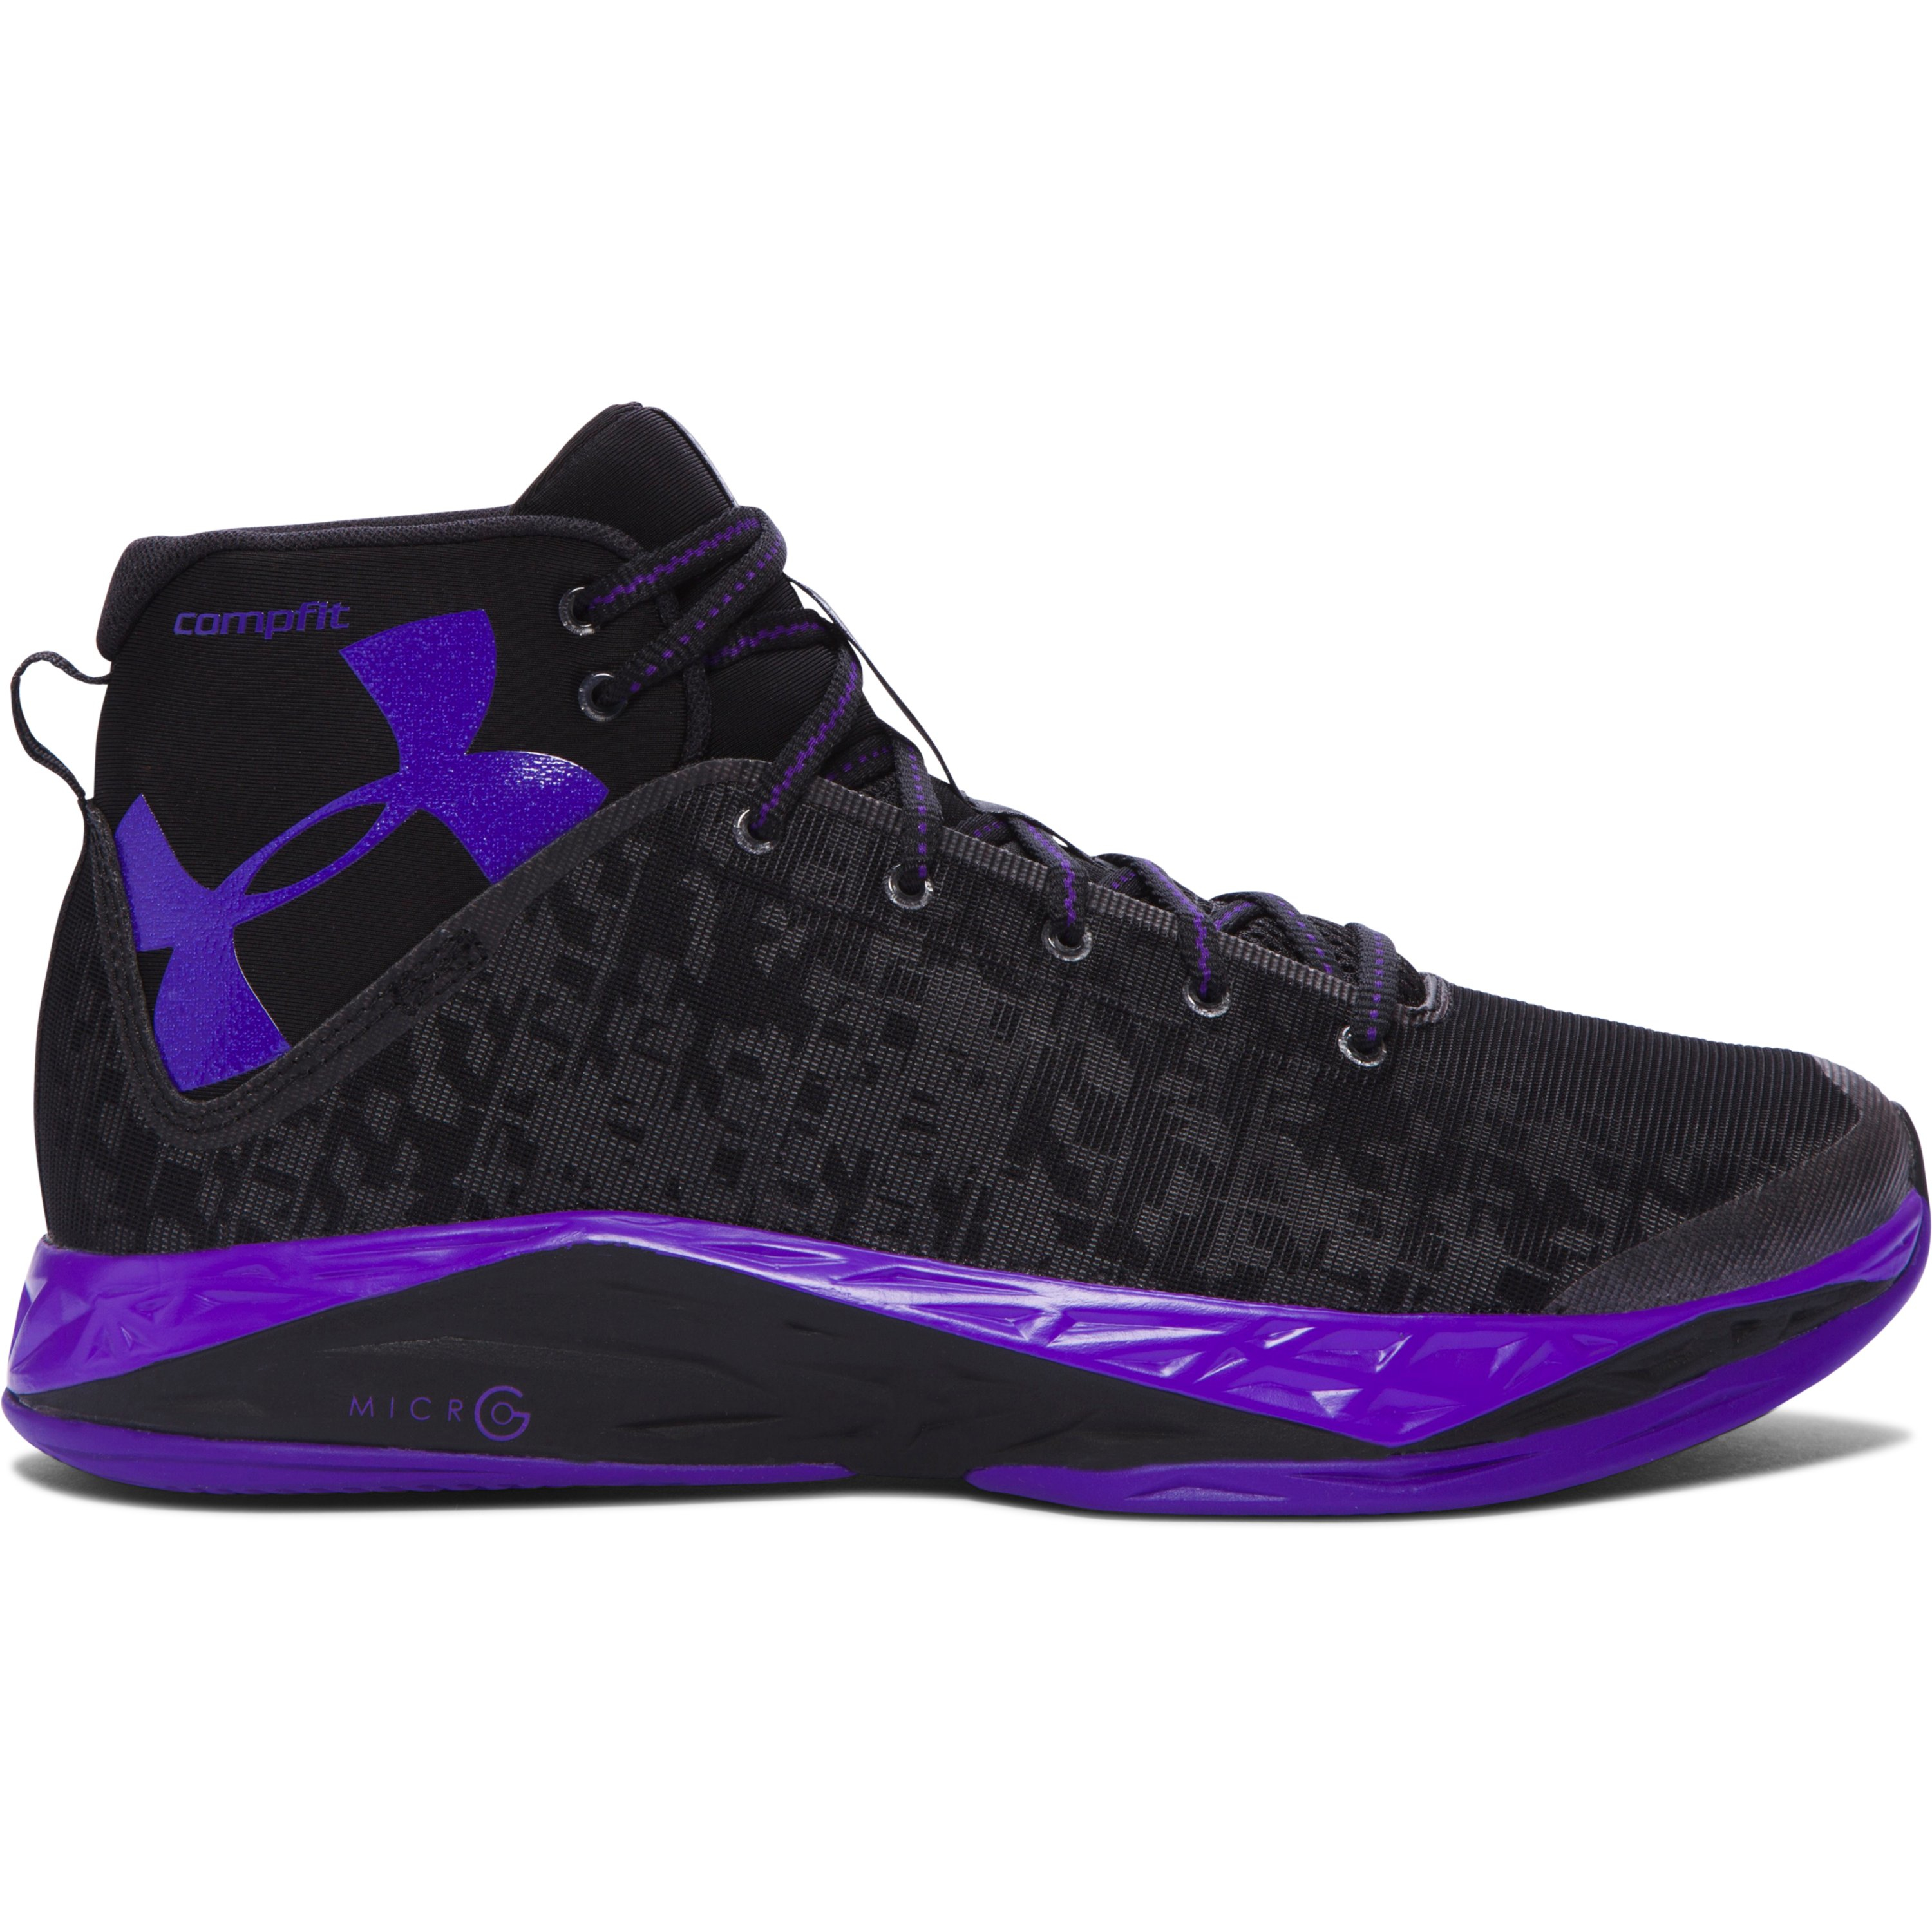 Lyst Under Armour Men's Ua Fireshot Basketball Shoes in